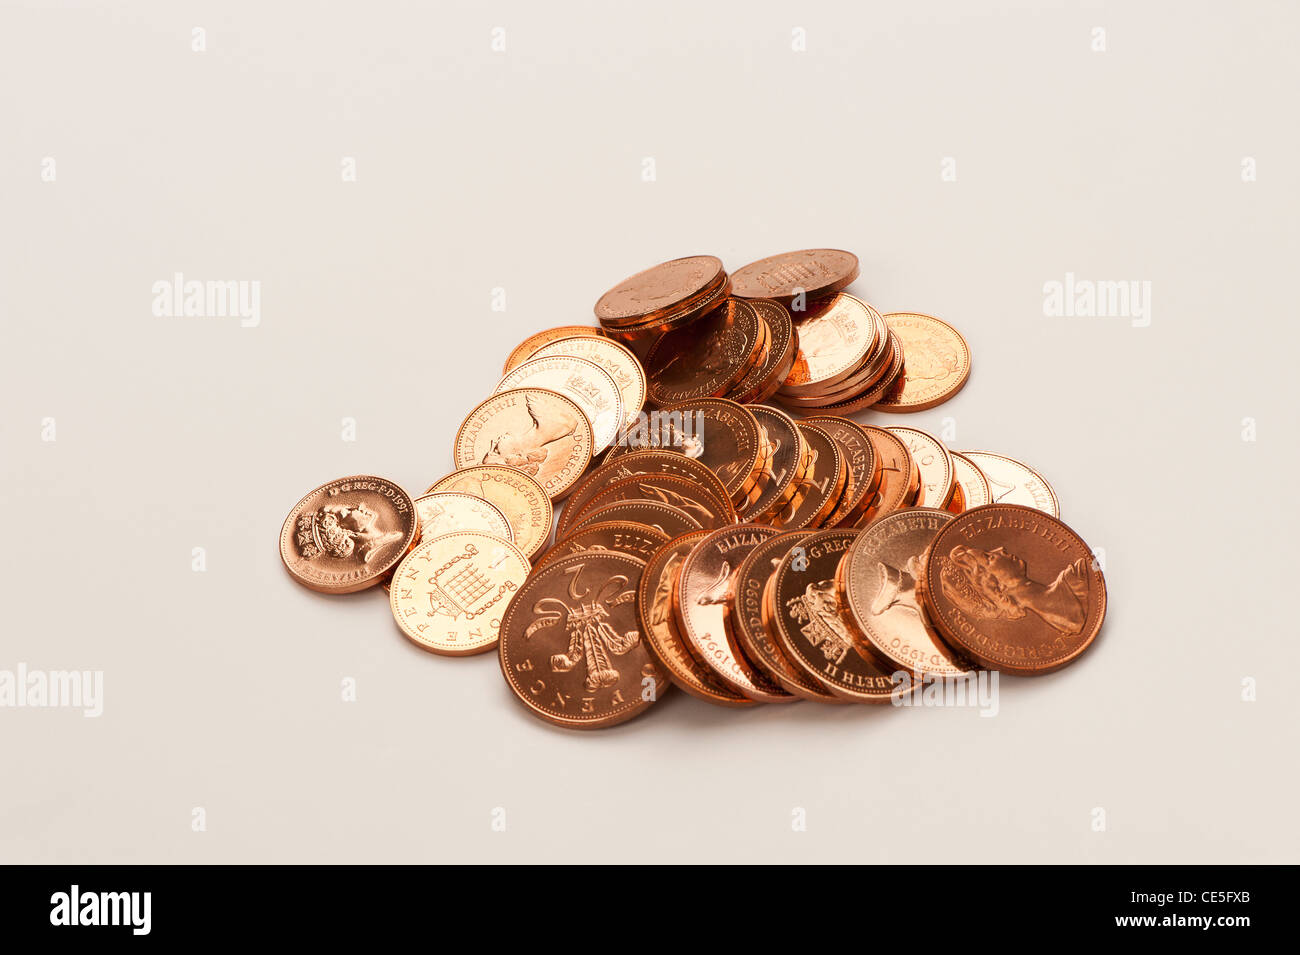 a pile of English copper coins on white background Stock Photo